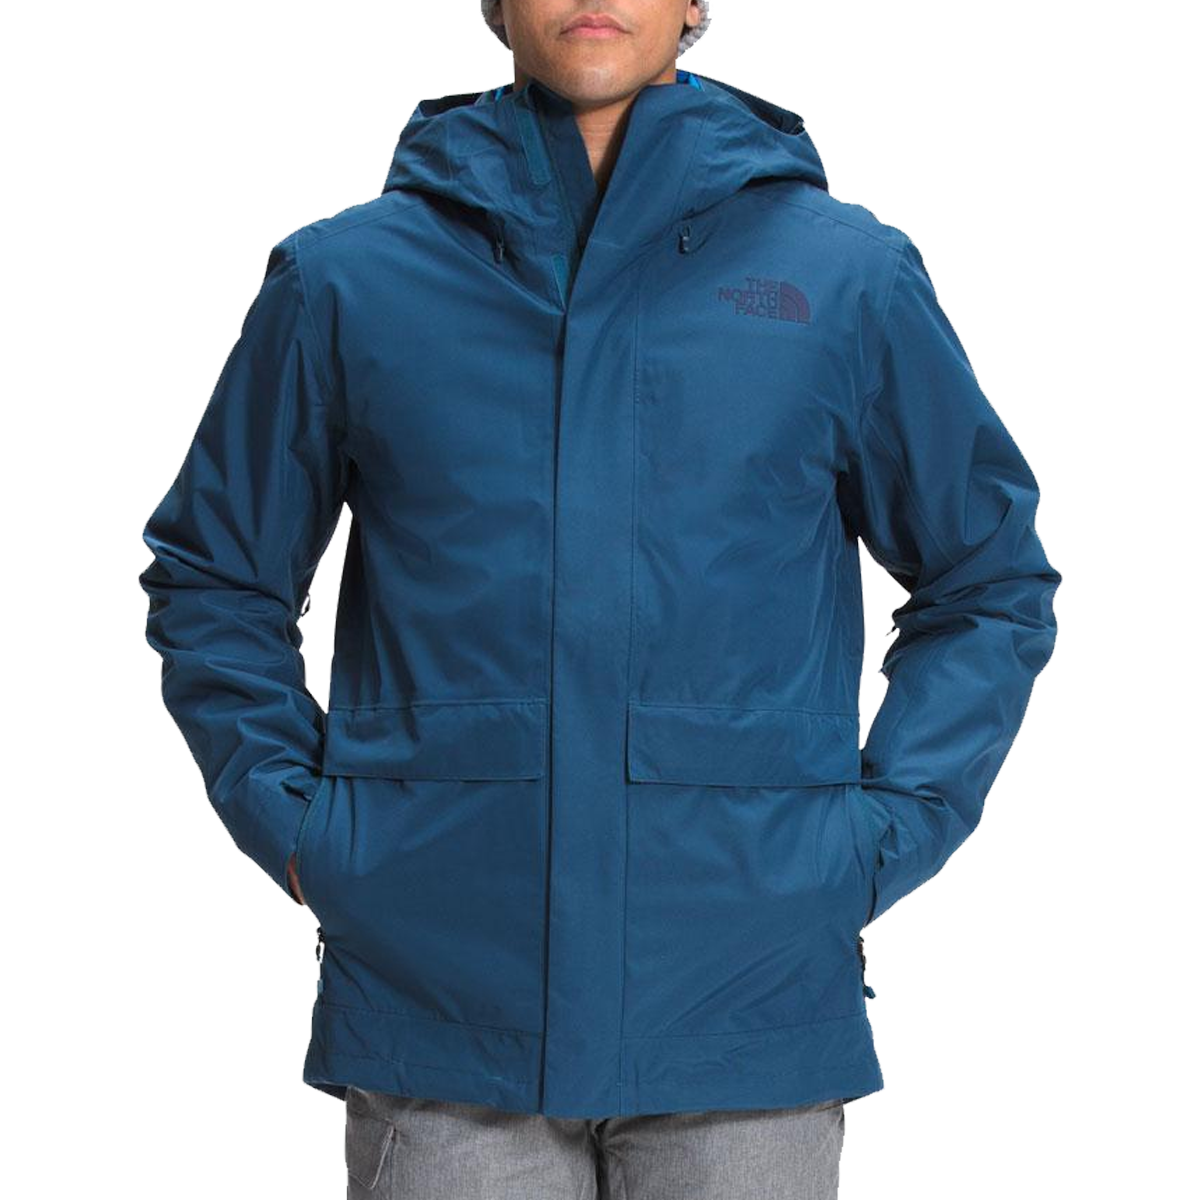 Men's Clement Triclimate Jacket alternate view